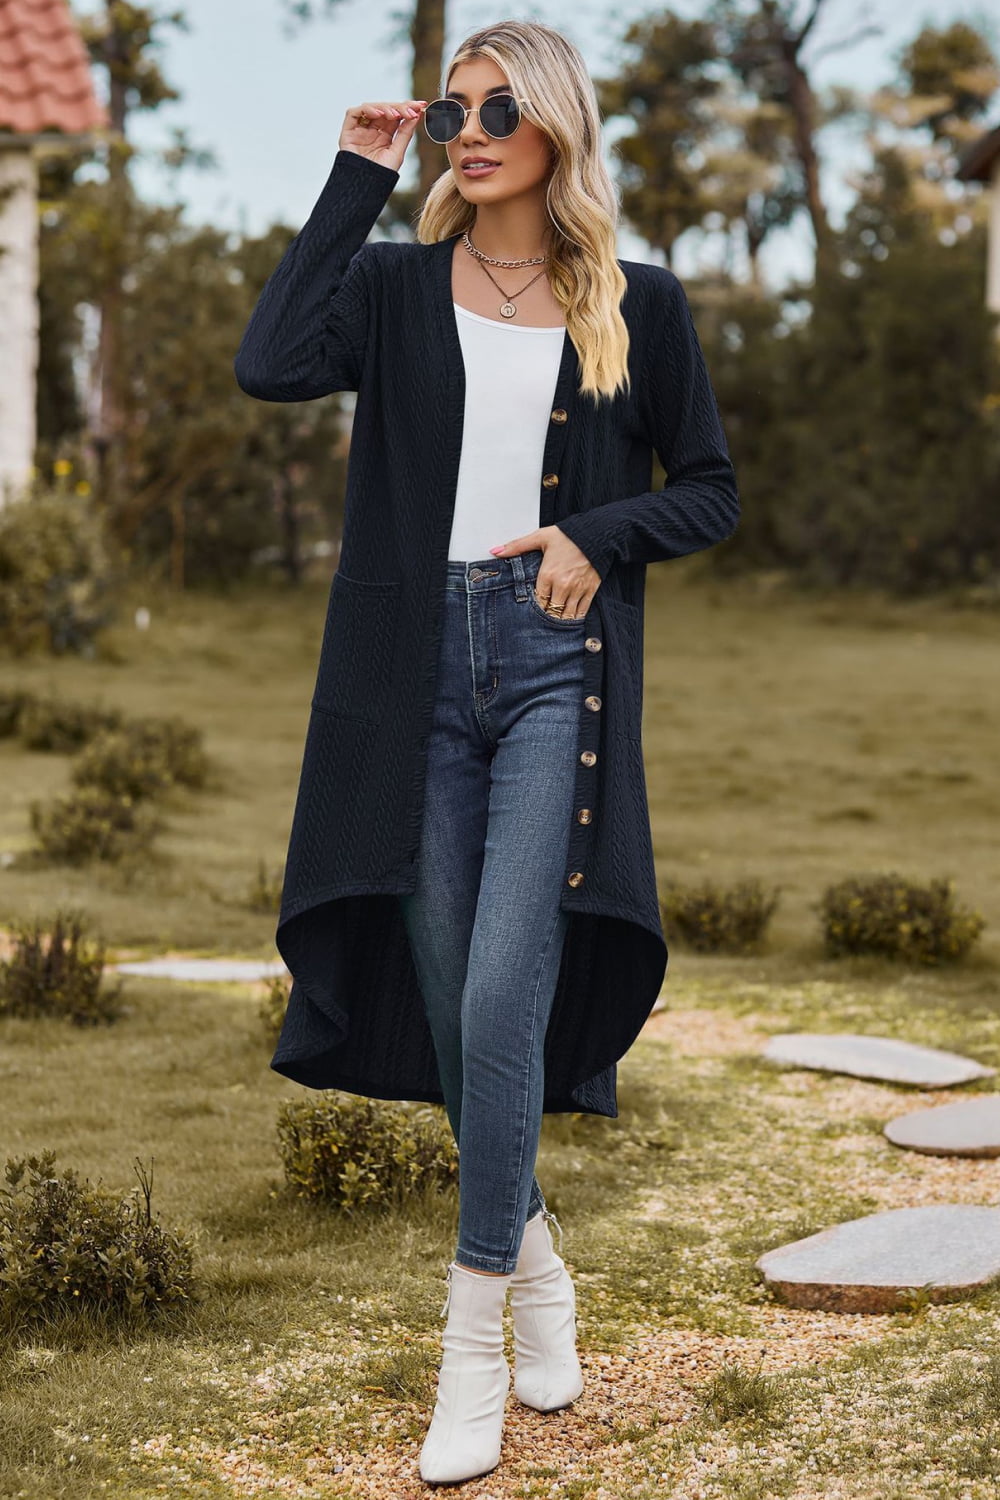 V-Neck Long Sleeve Cardigan with Pocket - Dark Blue / S - Women’s Clothing & Accessories - Shirts & Tops - 14 - 2024